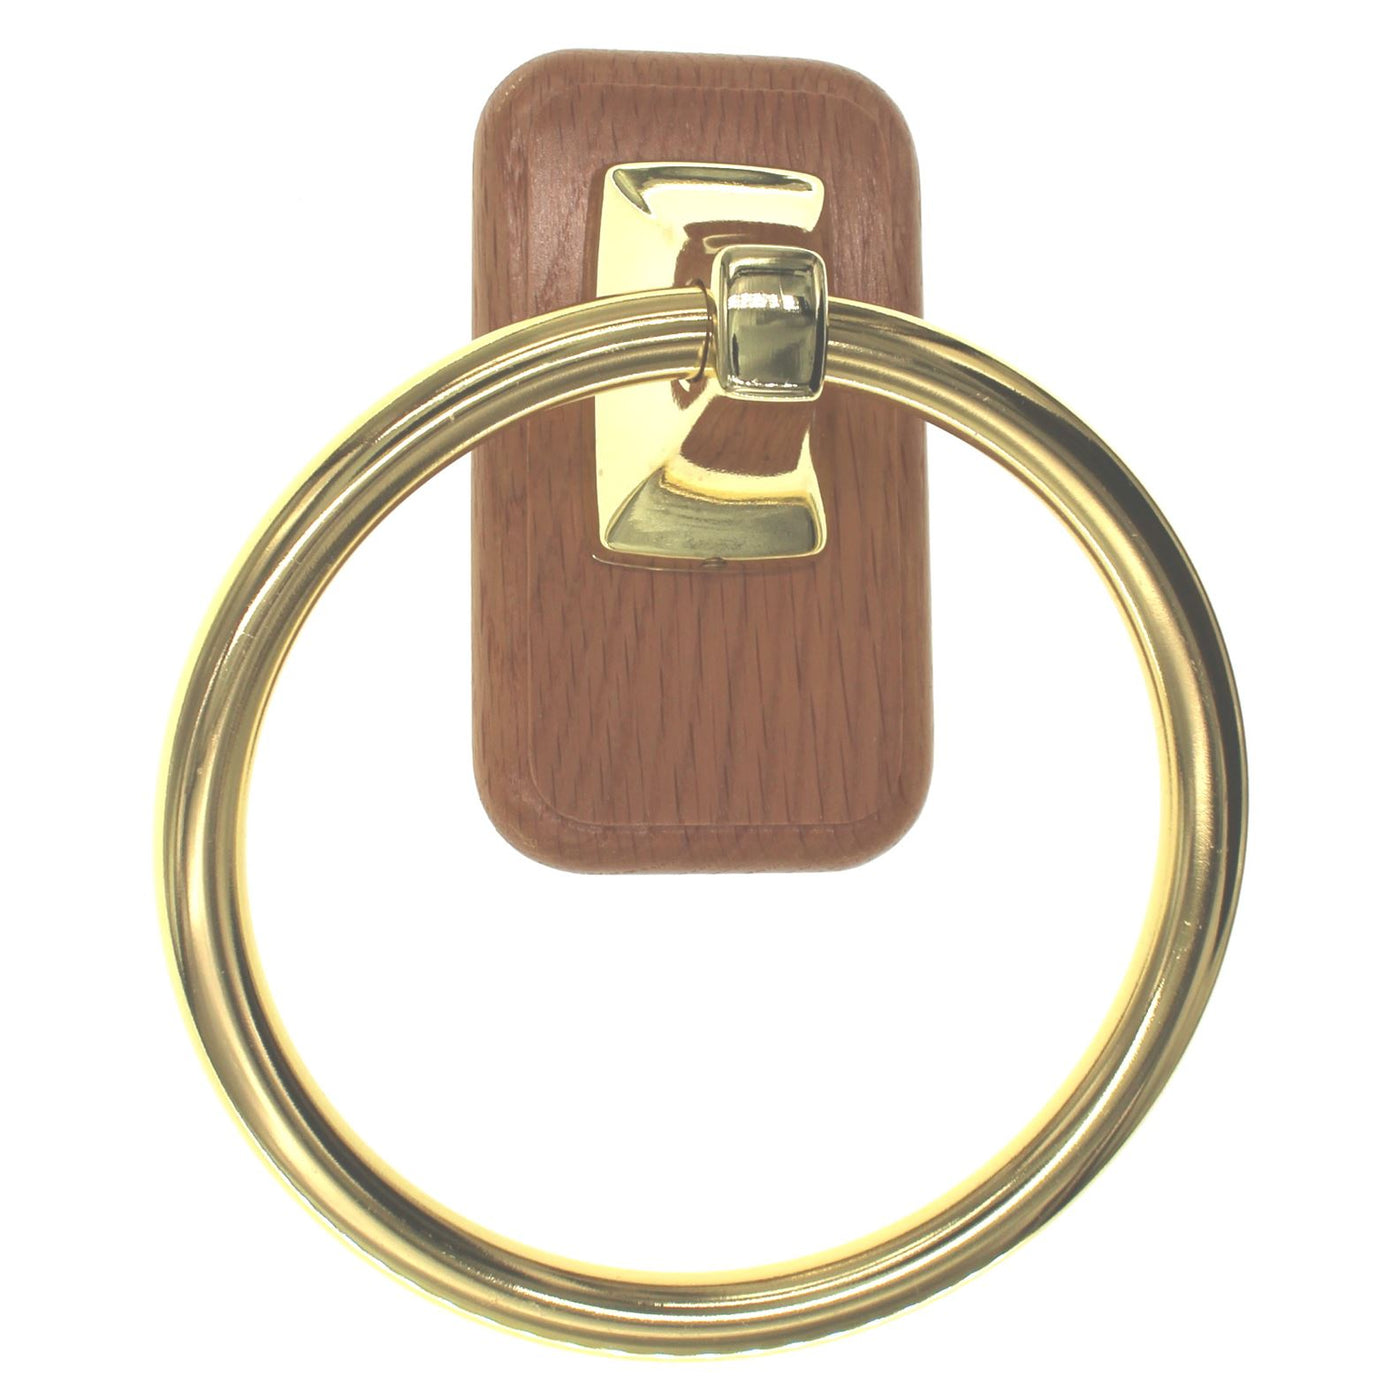 Amerock Accents 6 Oak and Brass Bath Towel Ring Wall Mounted 52227